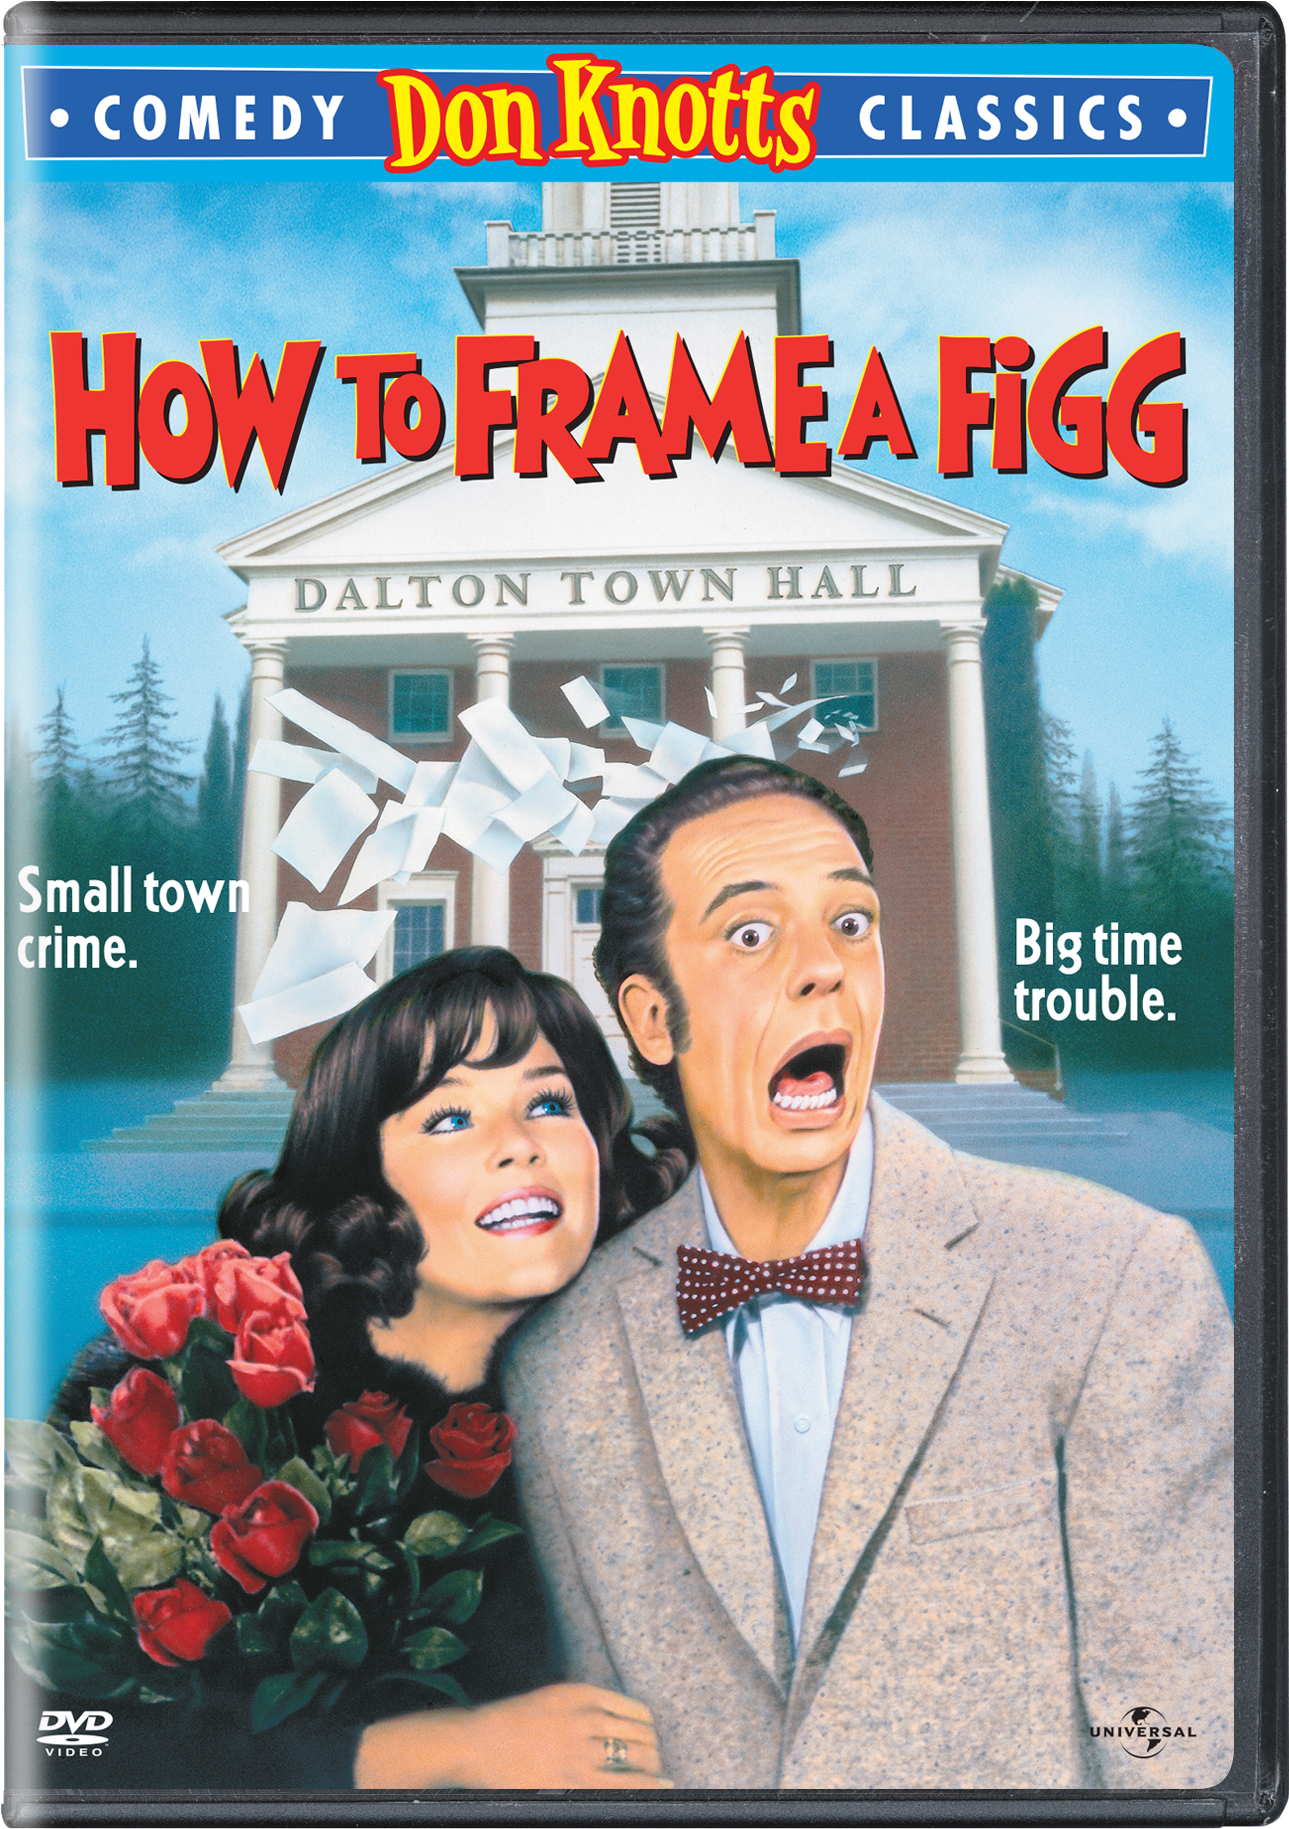 How To Frame A Figg - DVD [ 1971 ]  - Comedy Movies On DVD - Movies On GRUV